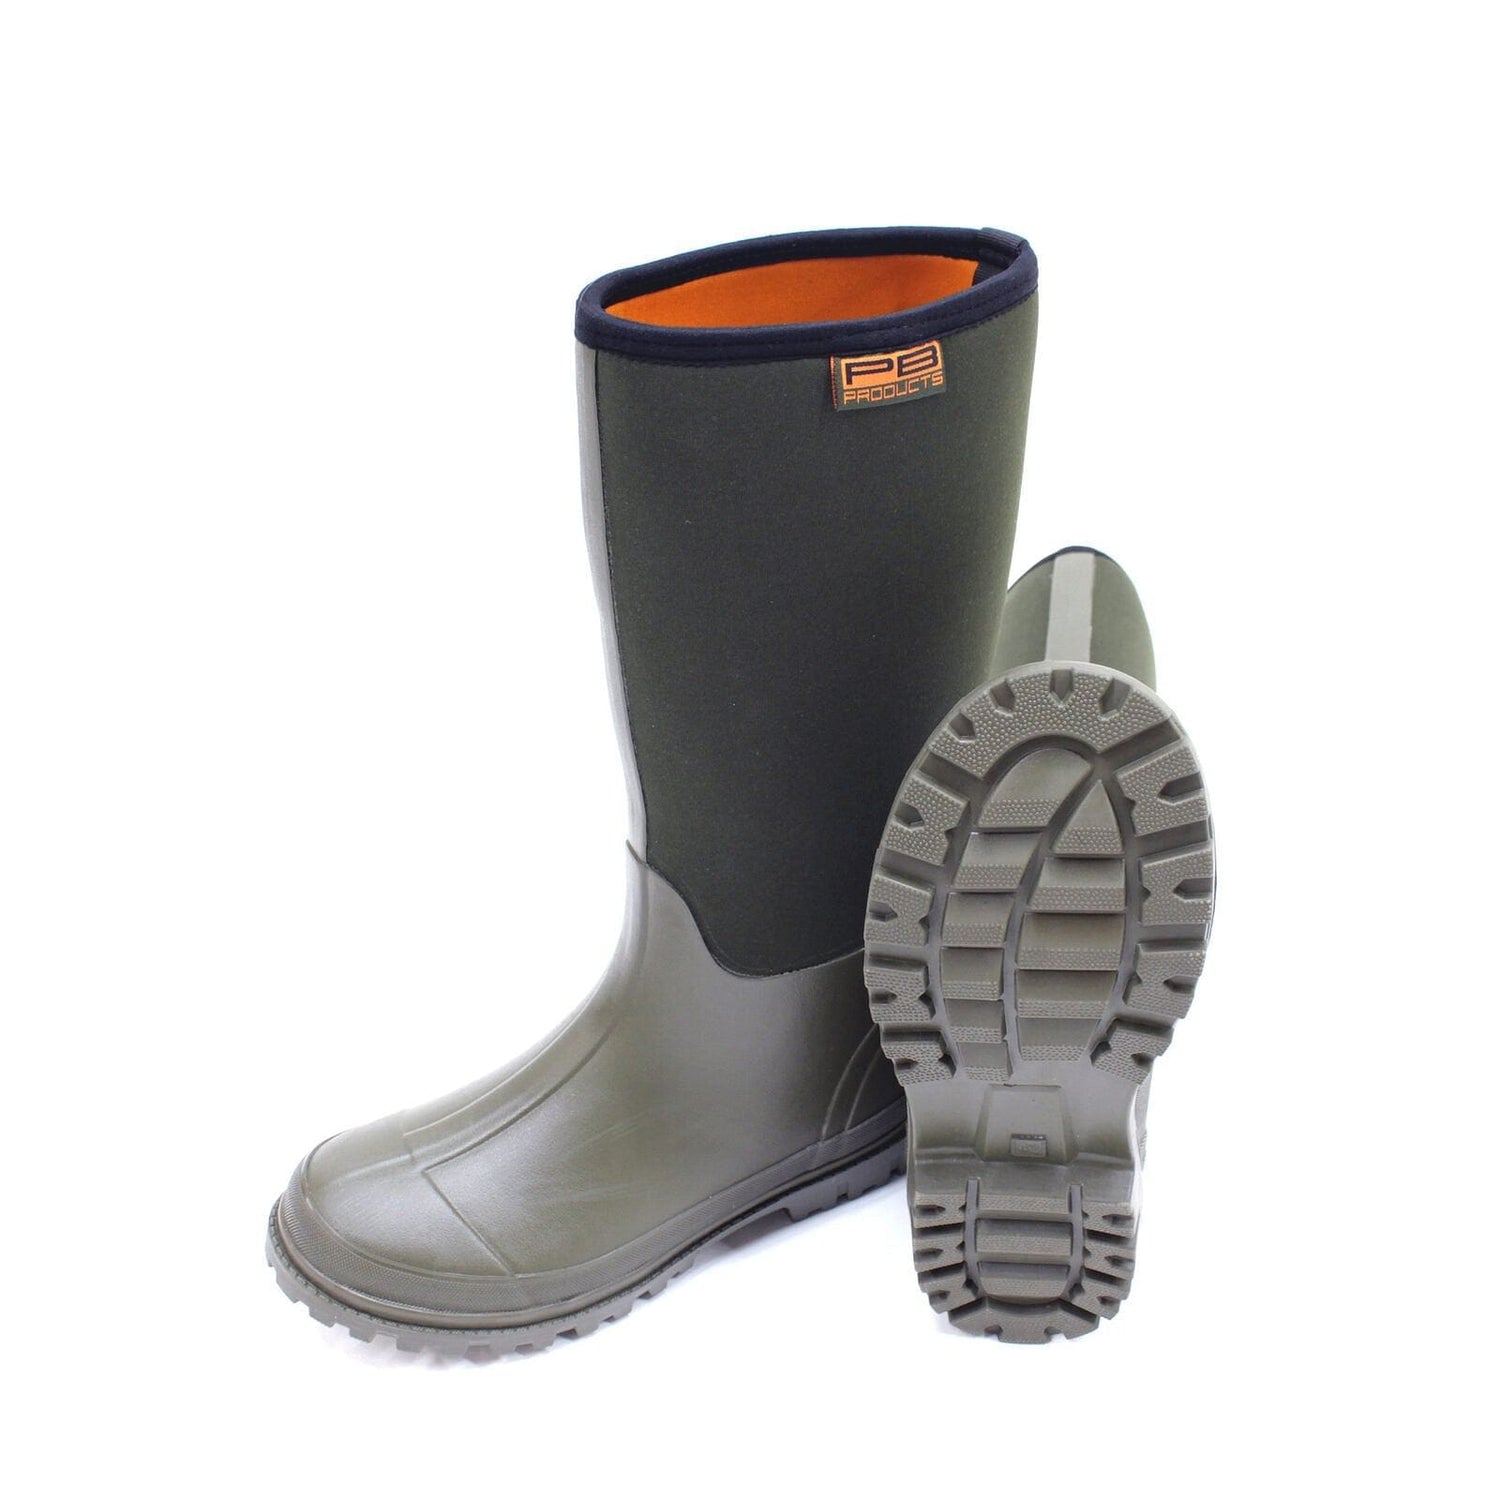 PB Products Neoprene Boots 6mm 42